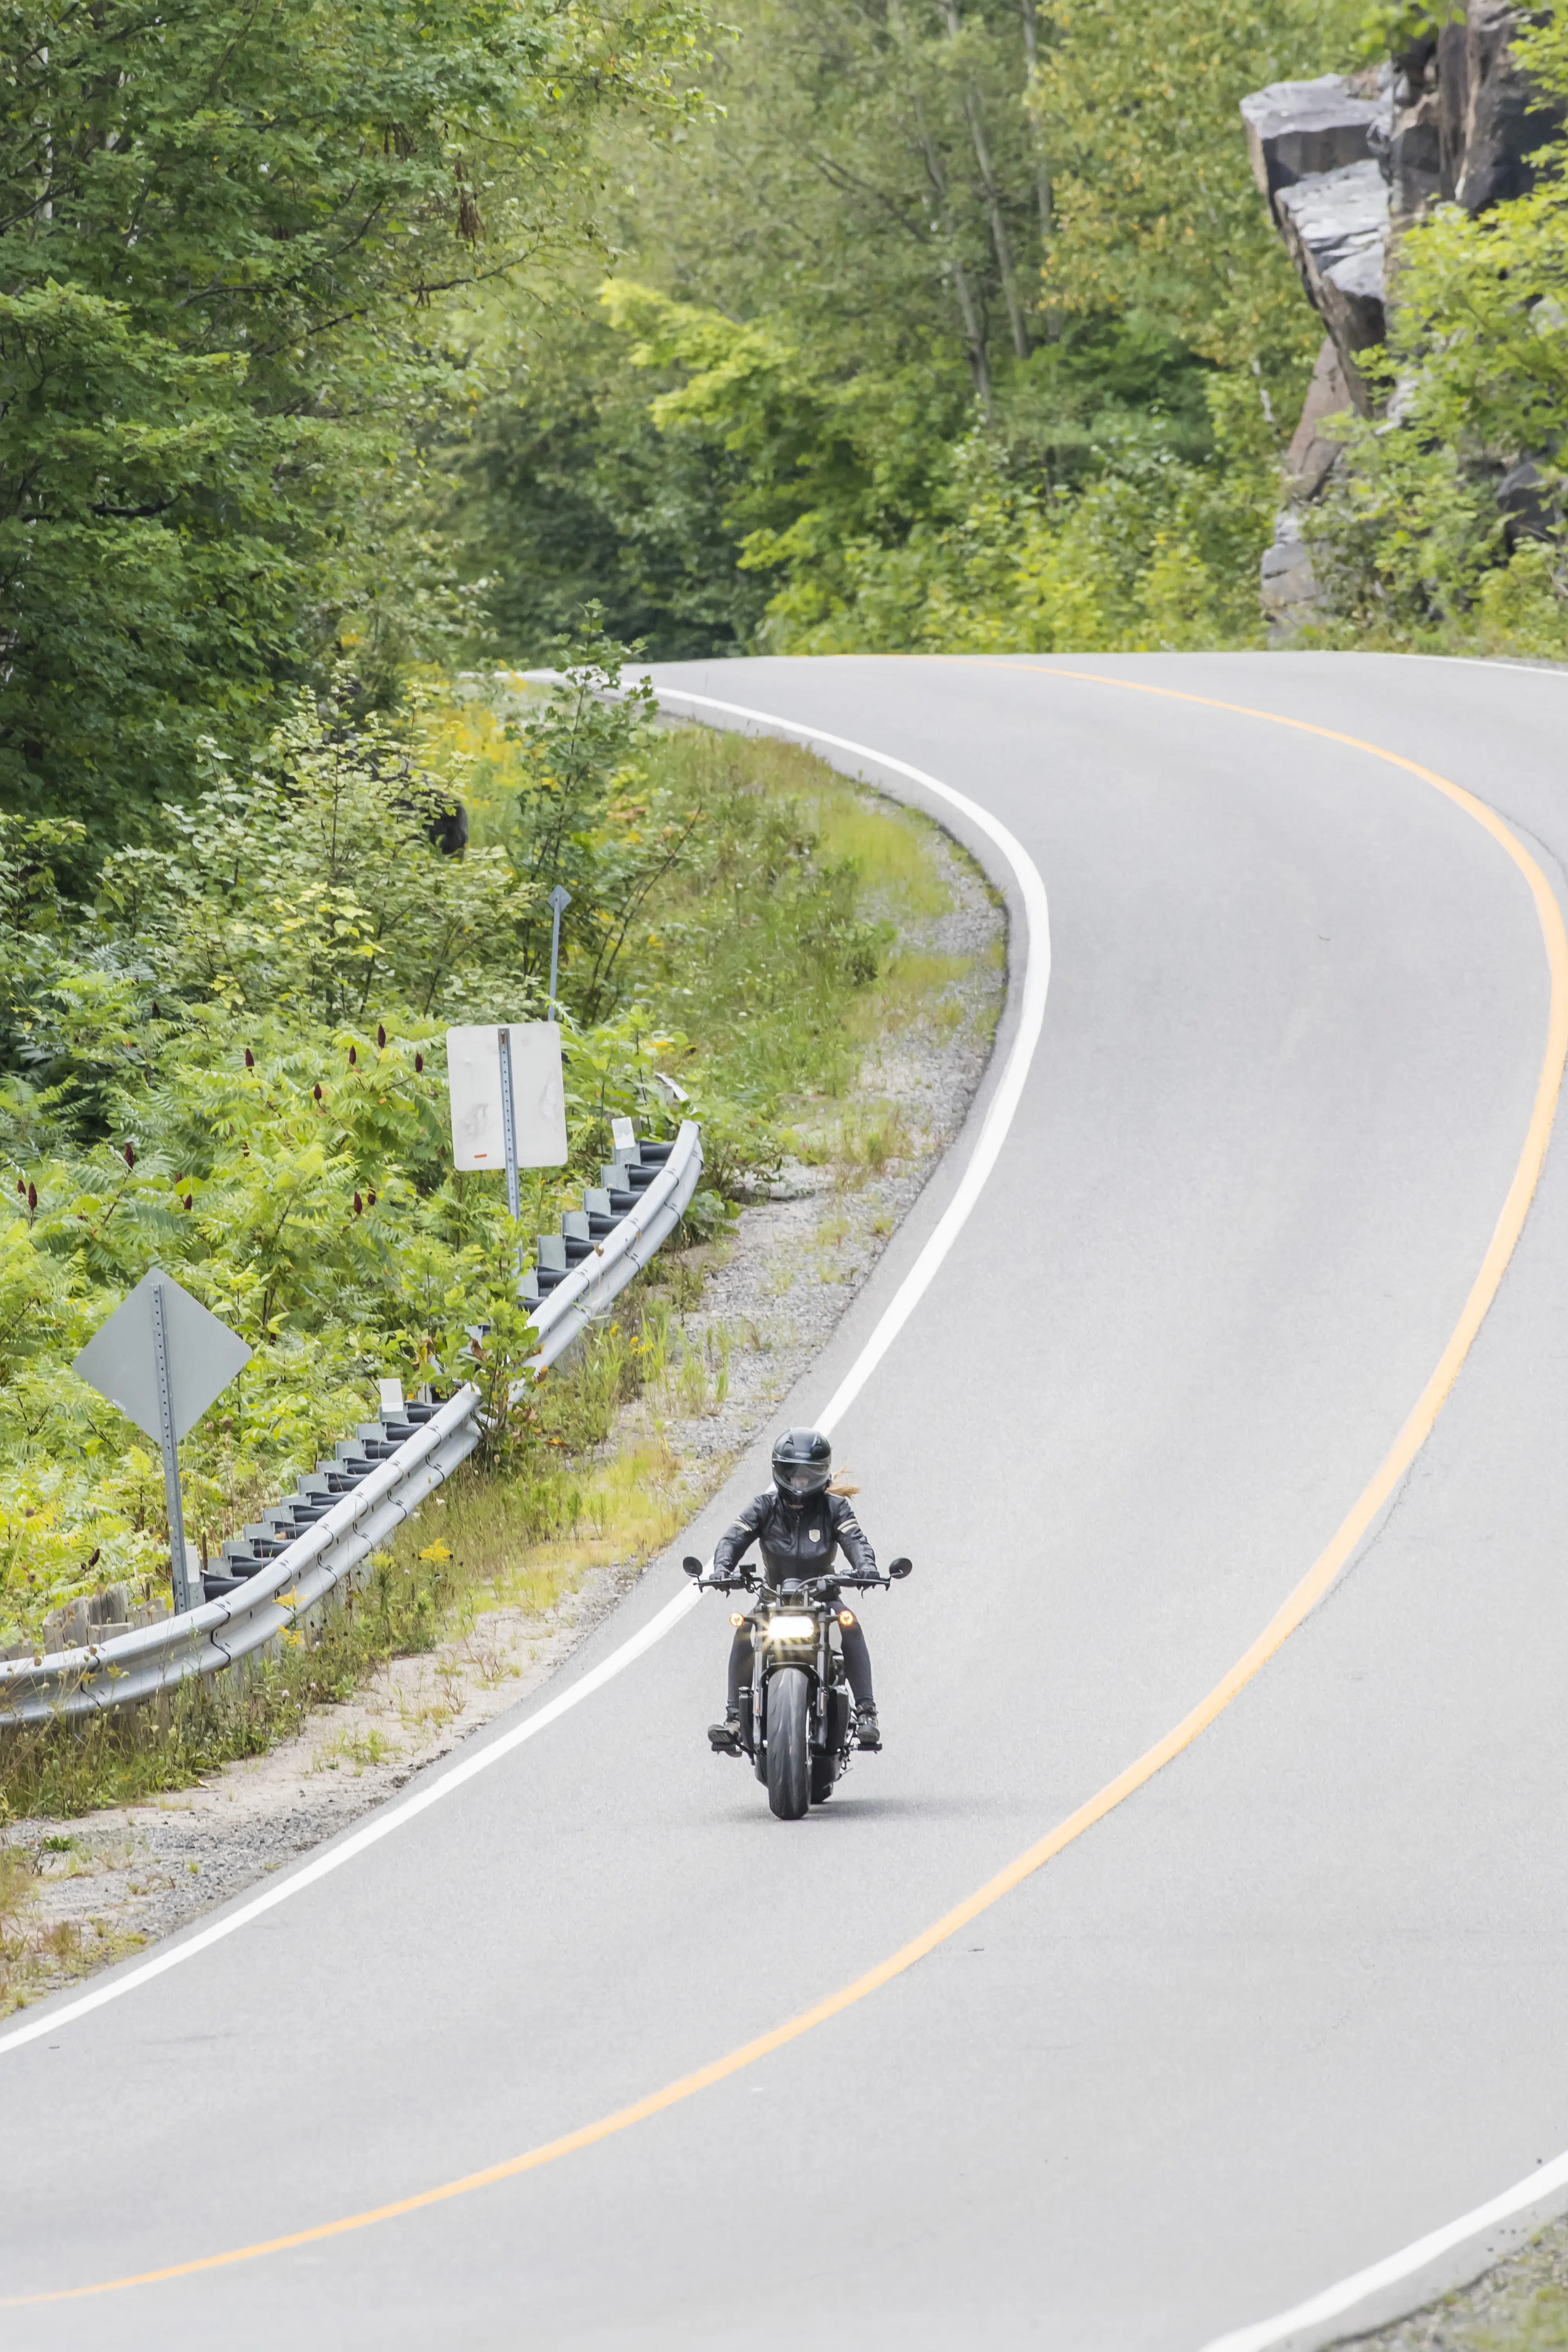 Comfort-wise, the Sportster S is best suited for short rides.